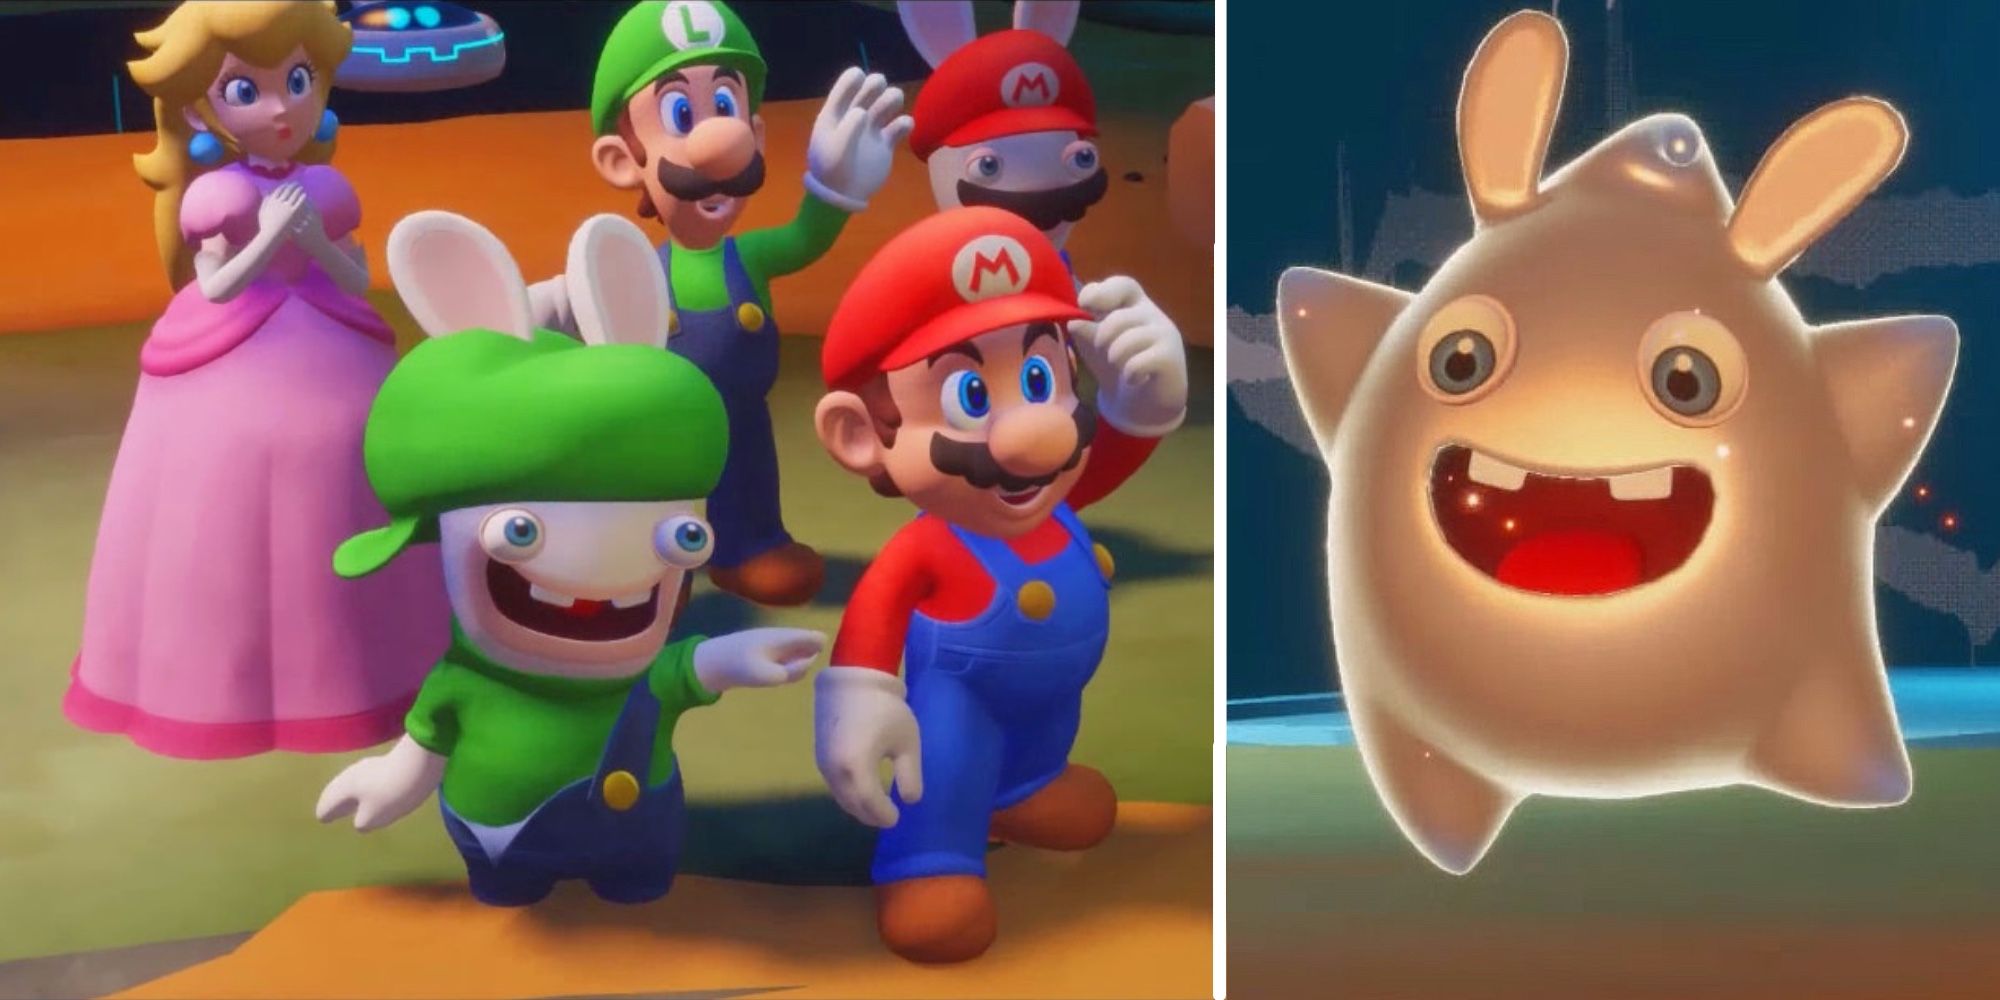 the super Mario characters as well as the rabbids with the first spark they meet in Mario Rabbids Sparks Of Hope